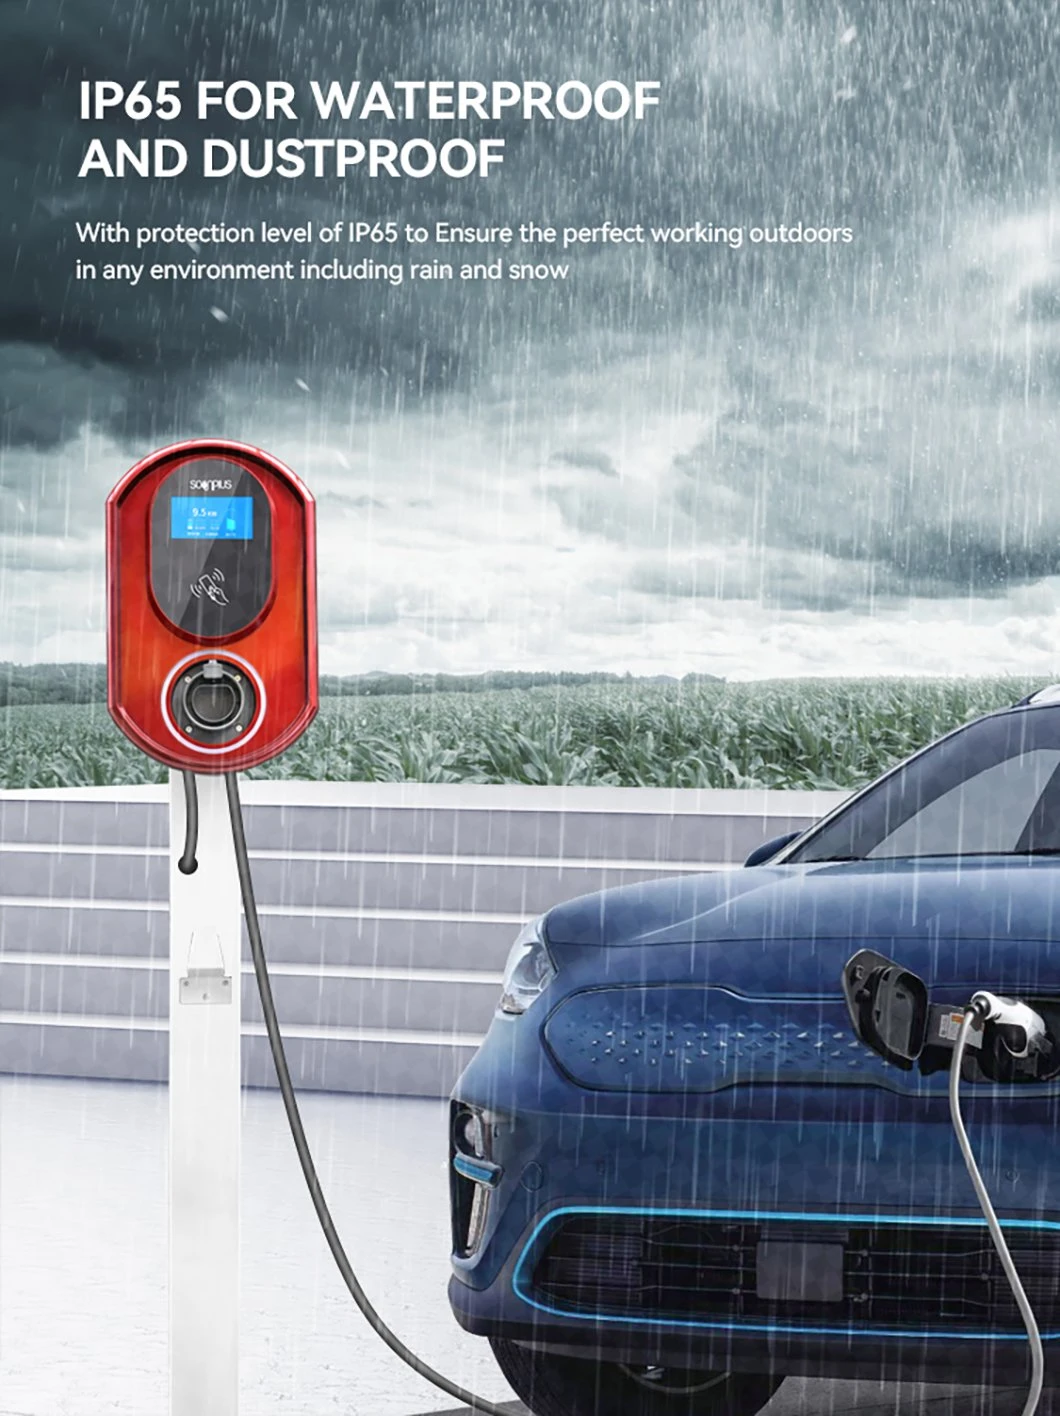 16A 11kw Actype1/2 RFID Electric Car Charger Station